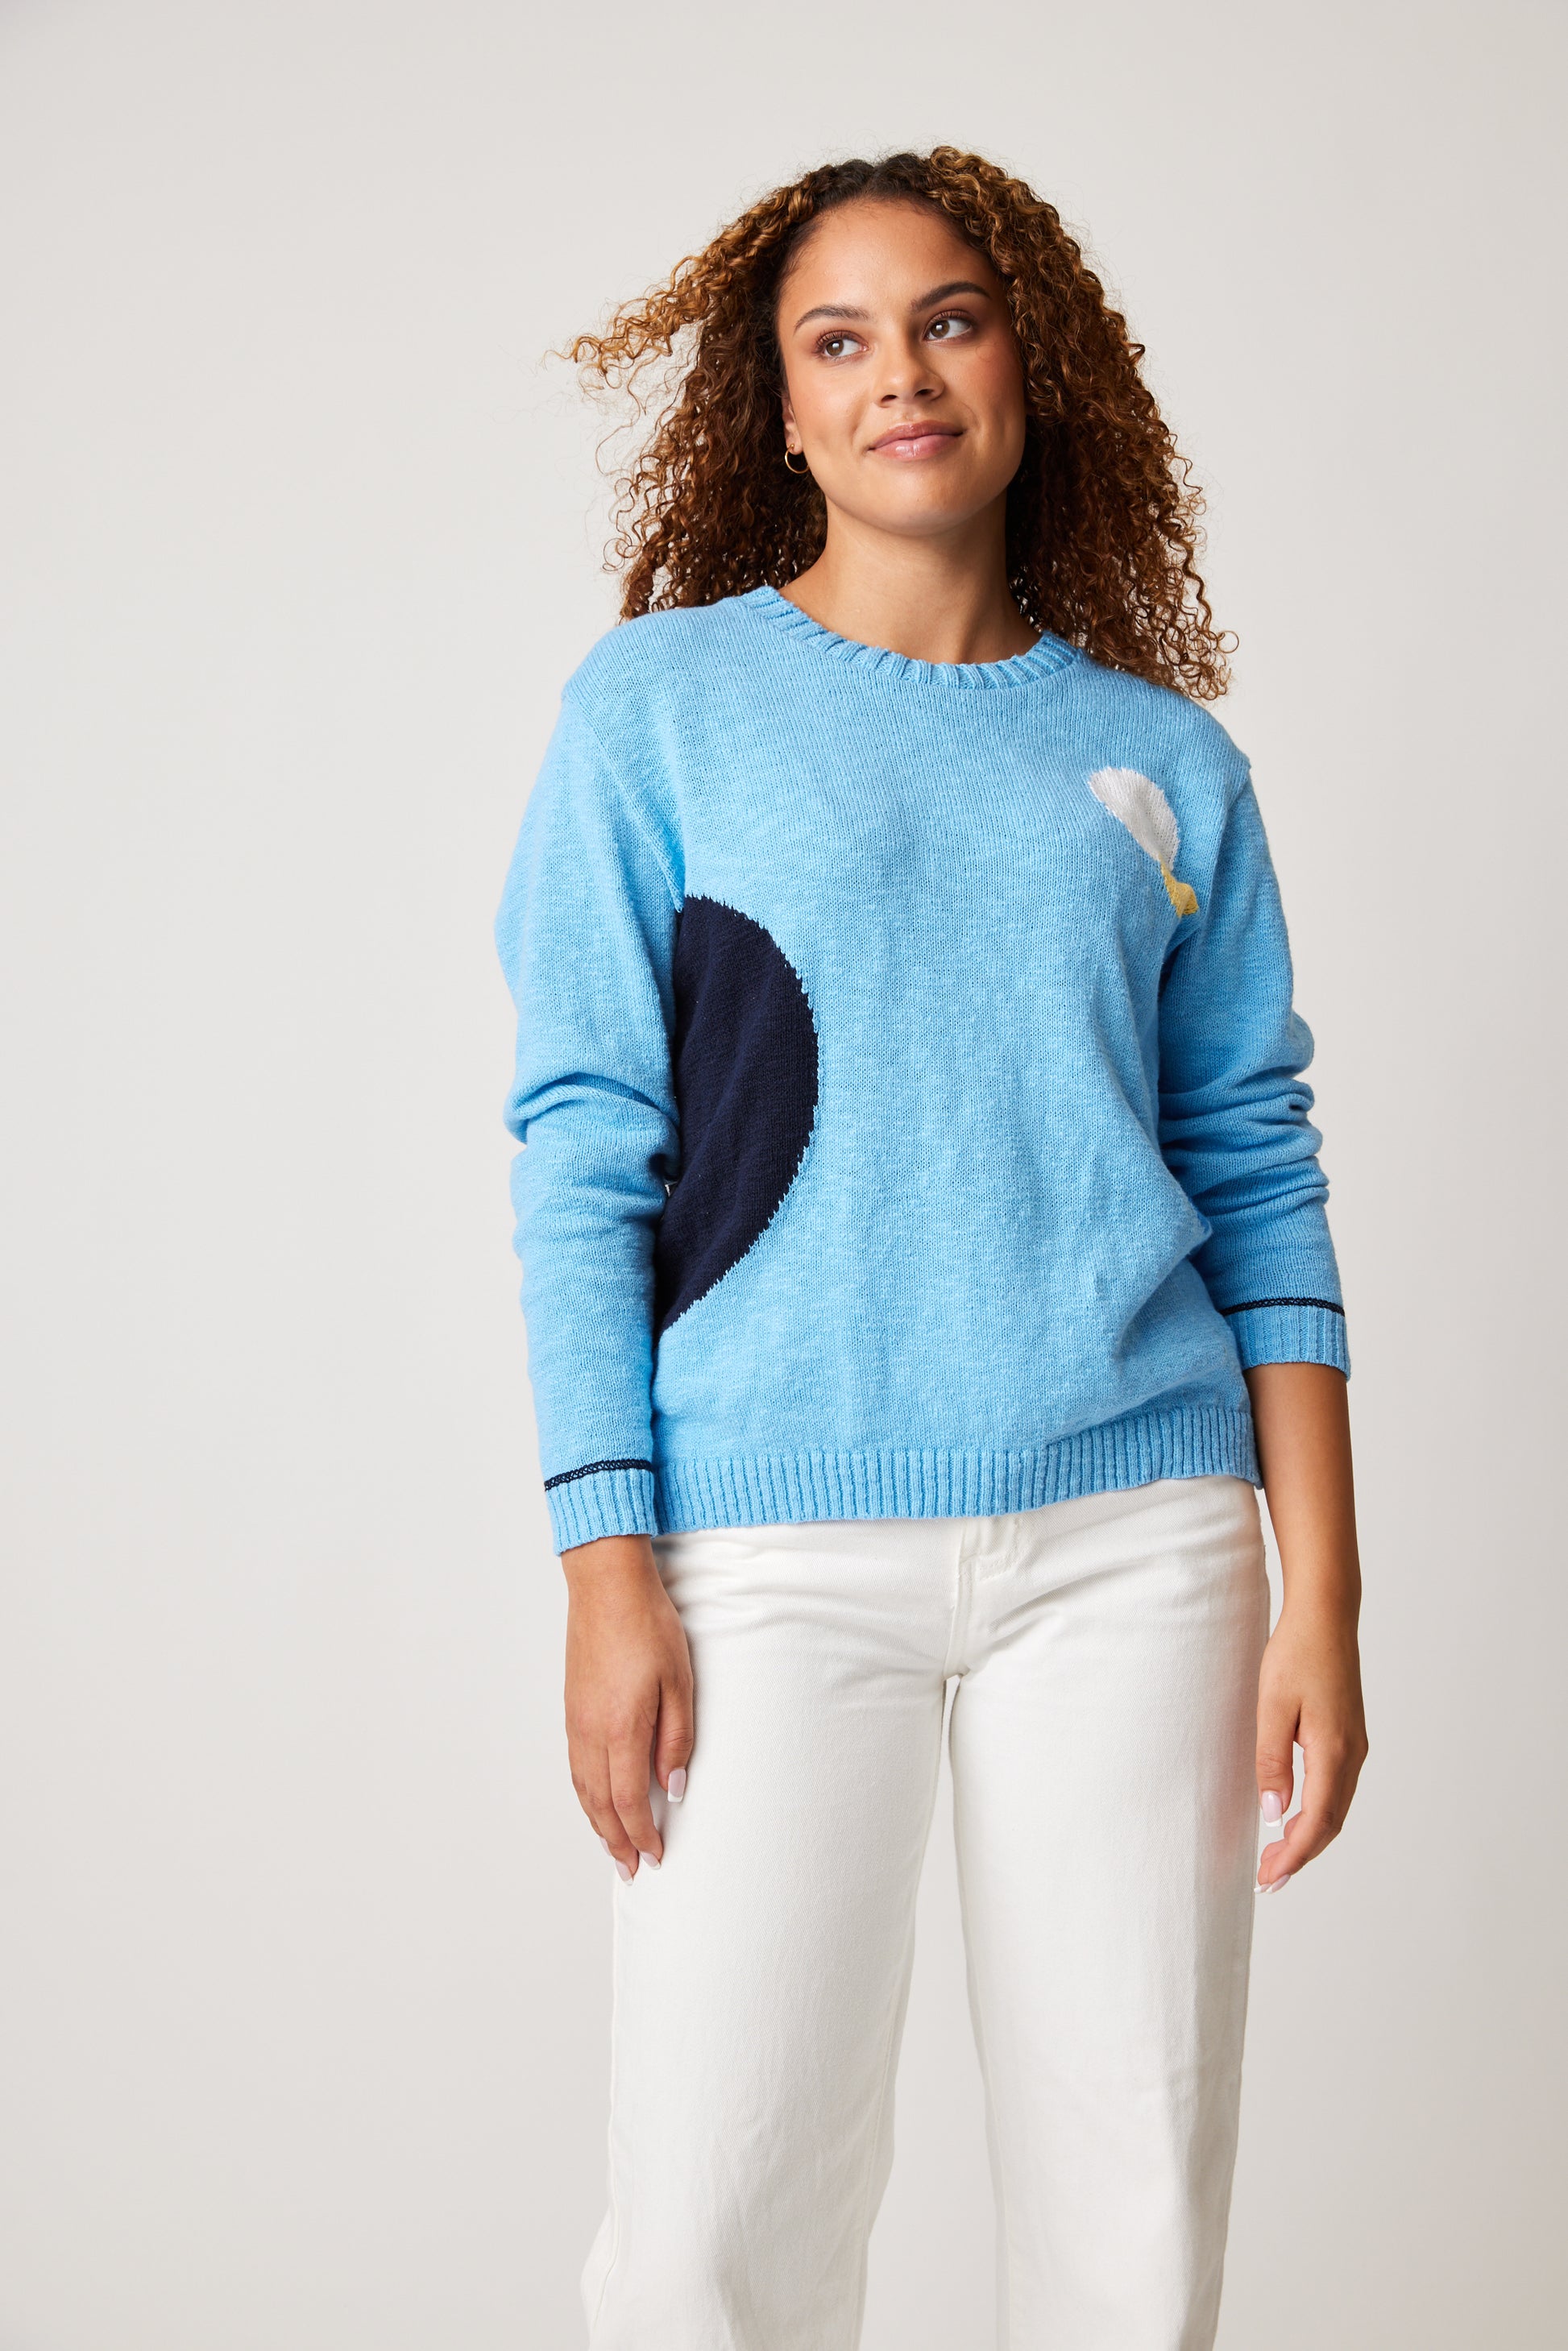 A woman with impeccable style wearing a Cotton Country Denny Dot Dot blue sweater.